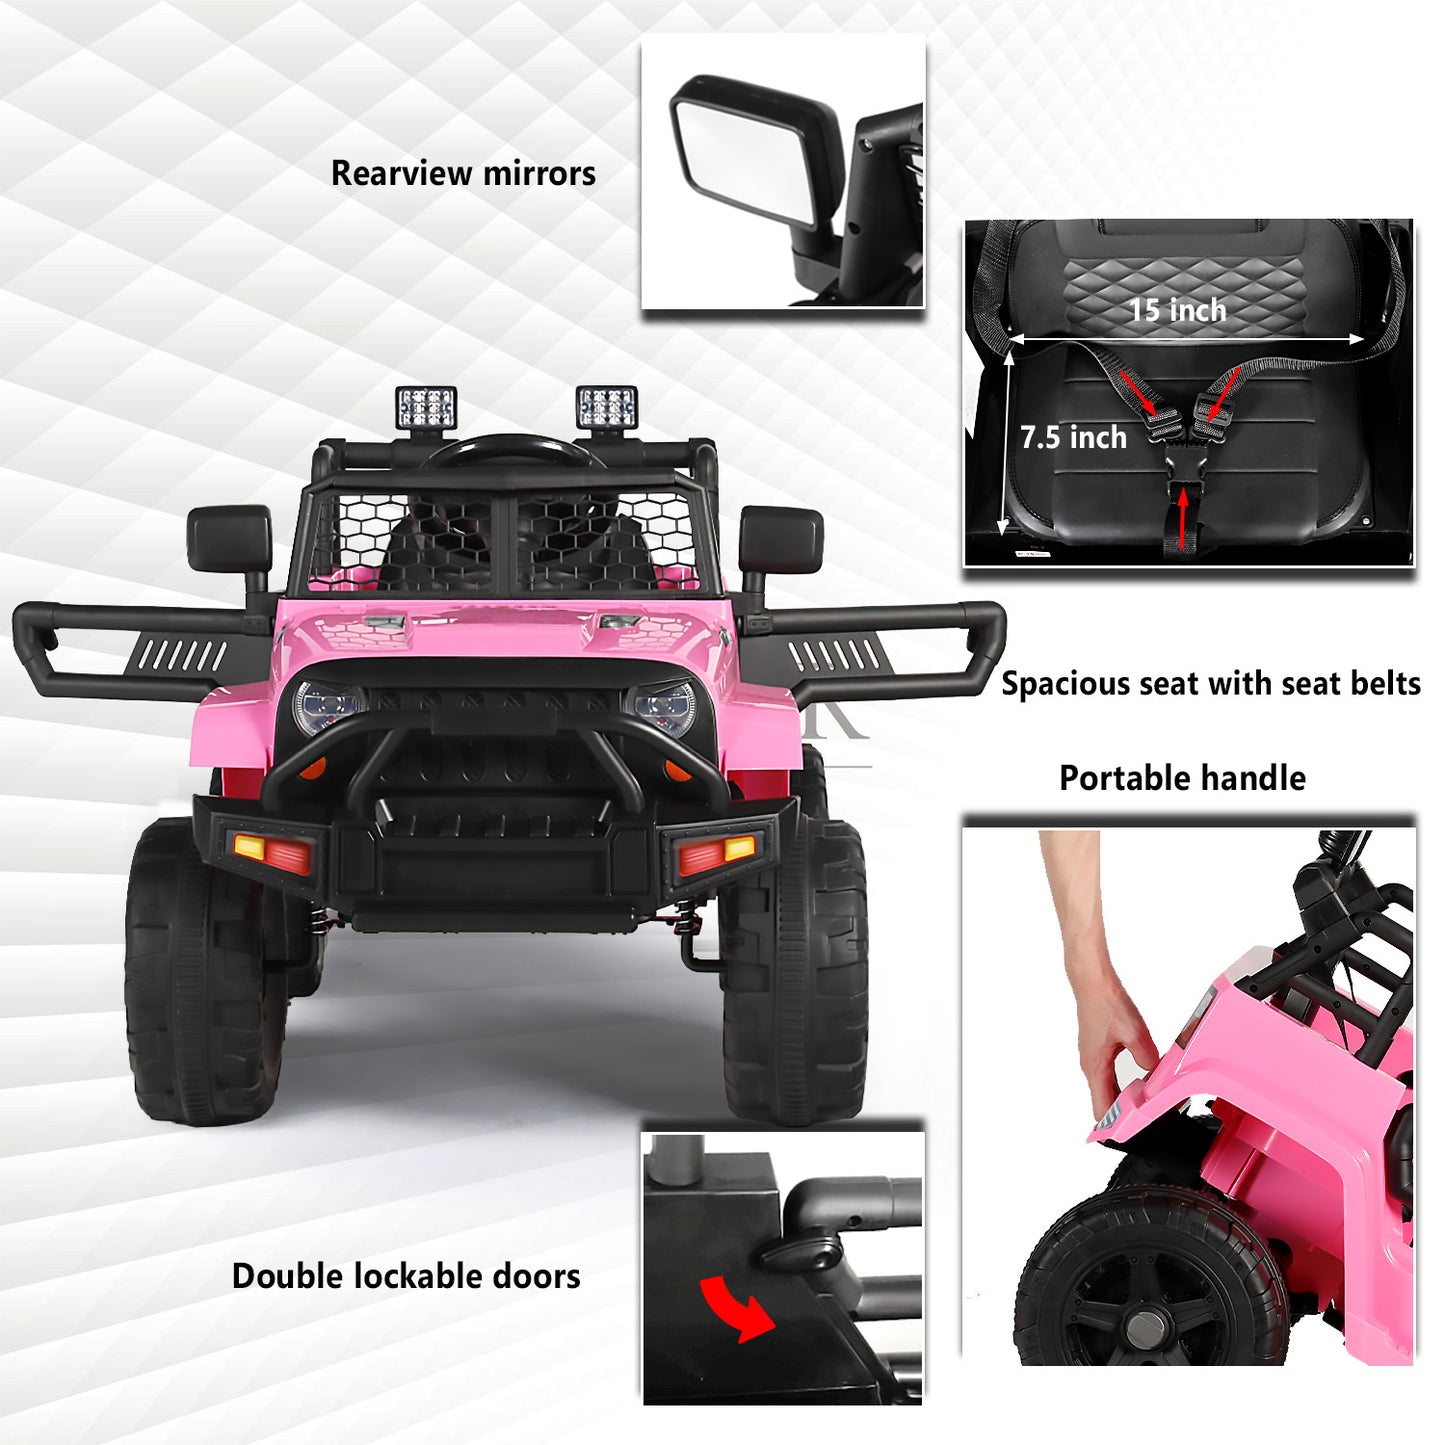 12V Kids Ride on Car Truck, Battery Powered Electric SUV w/ 2.4G Remote Control, Pink